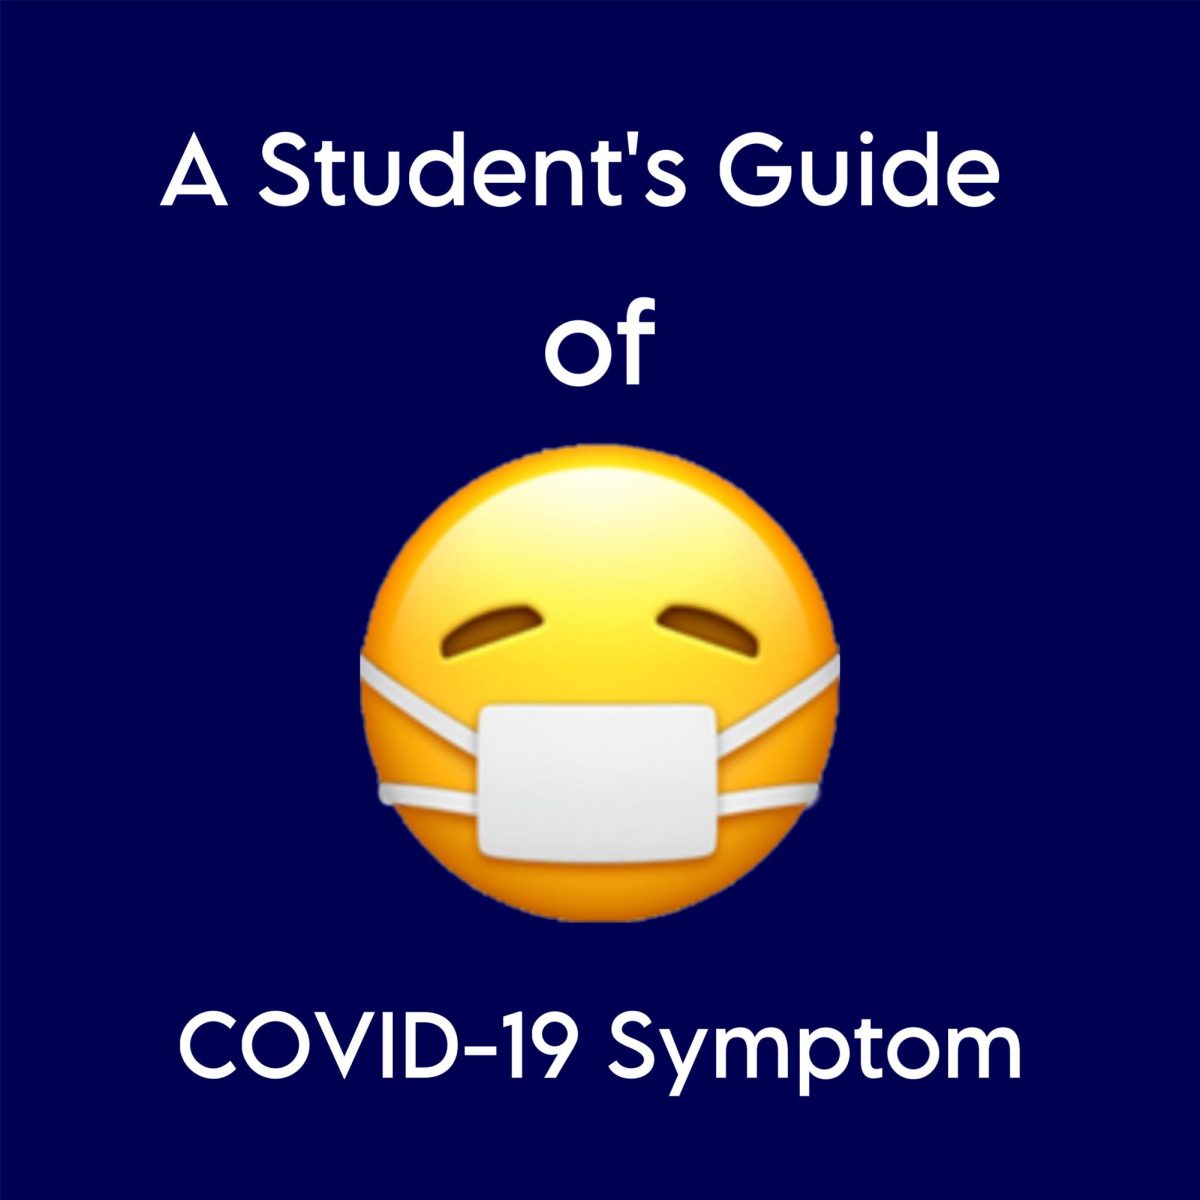 A+Students+Guide+of+COVID-19+Symptoms